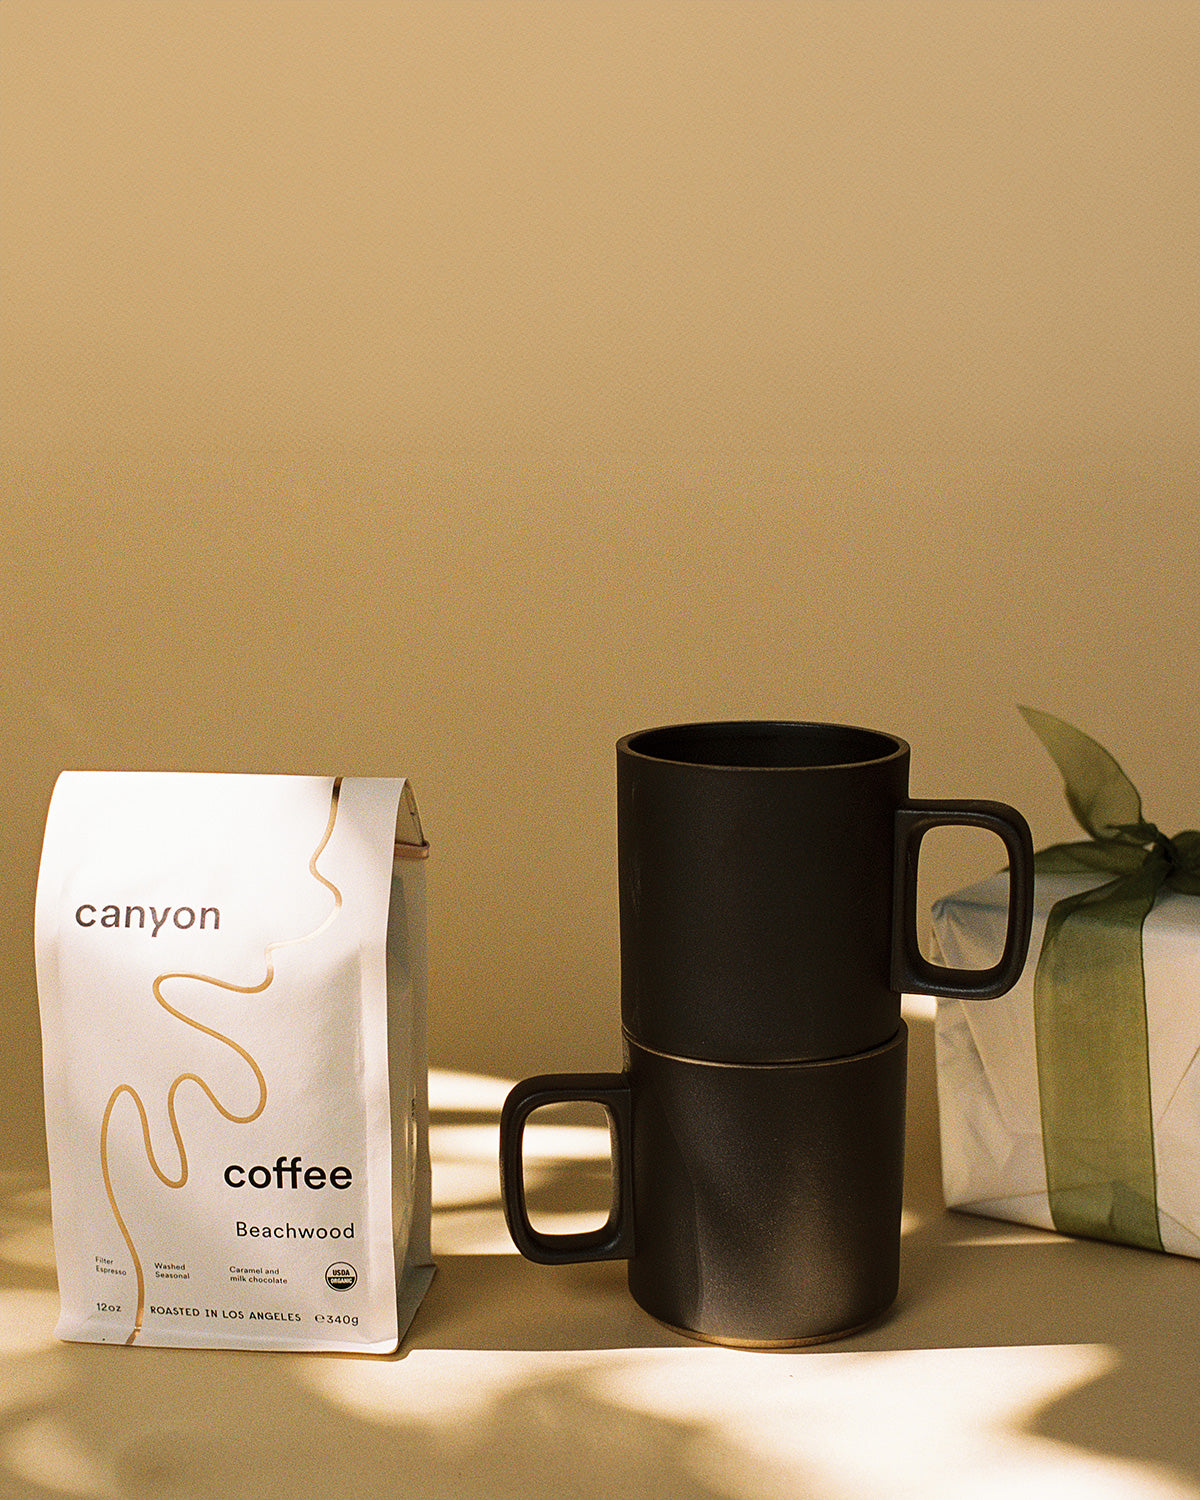 The Host Gift Bundle by Canyon coffee featuring a pair of tan Hasami mugs and a bag of organic coffee